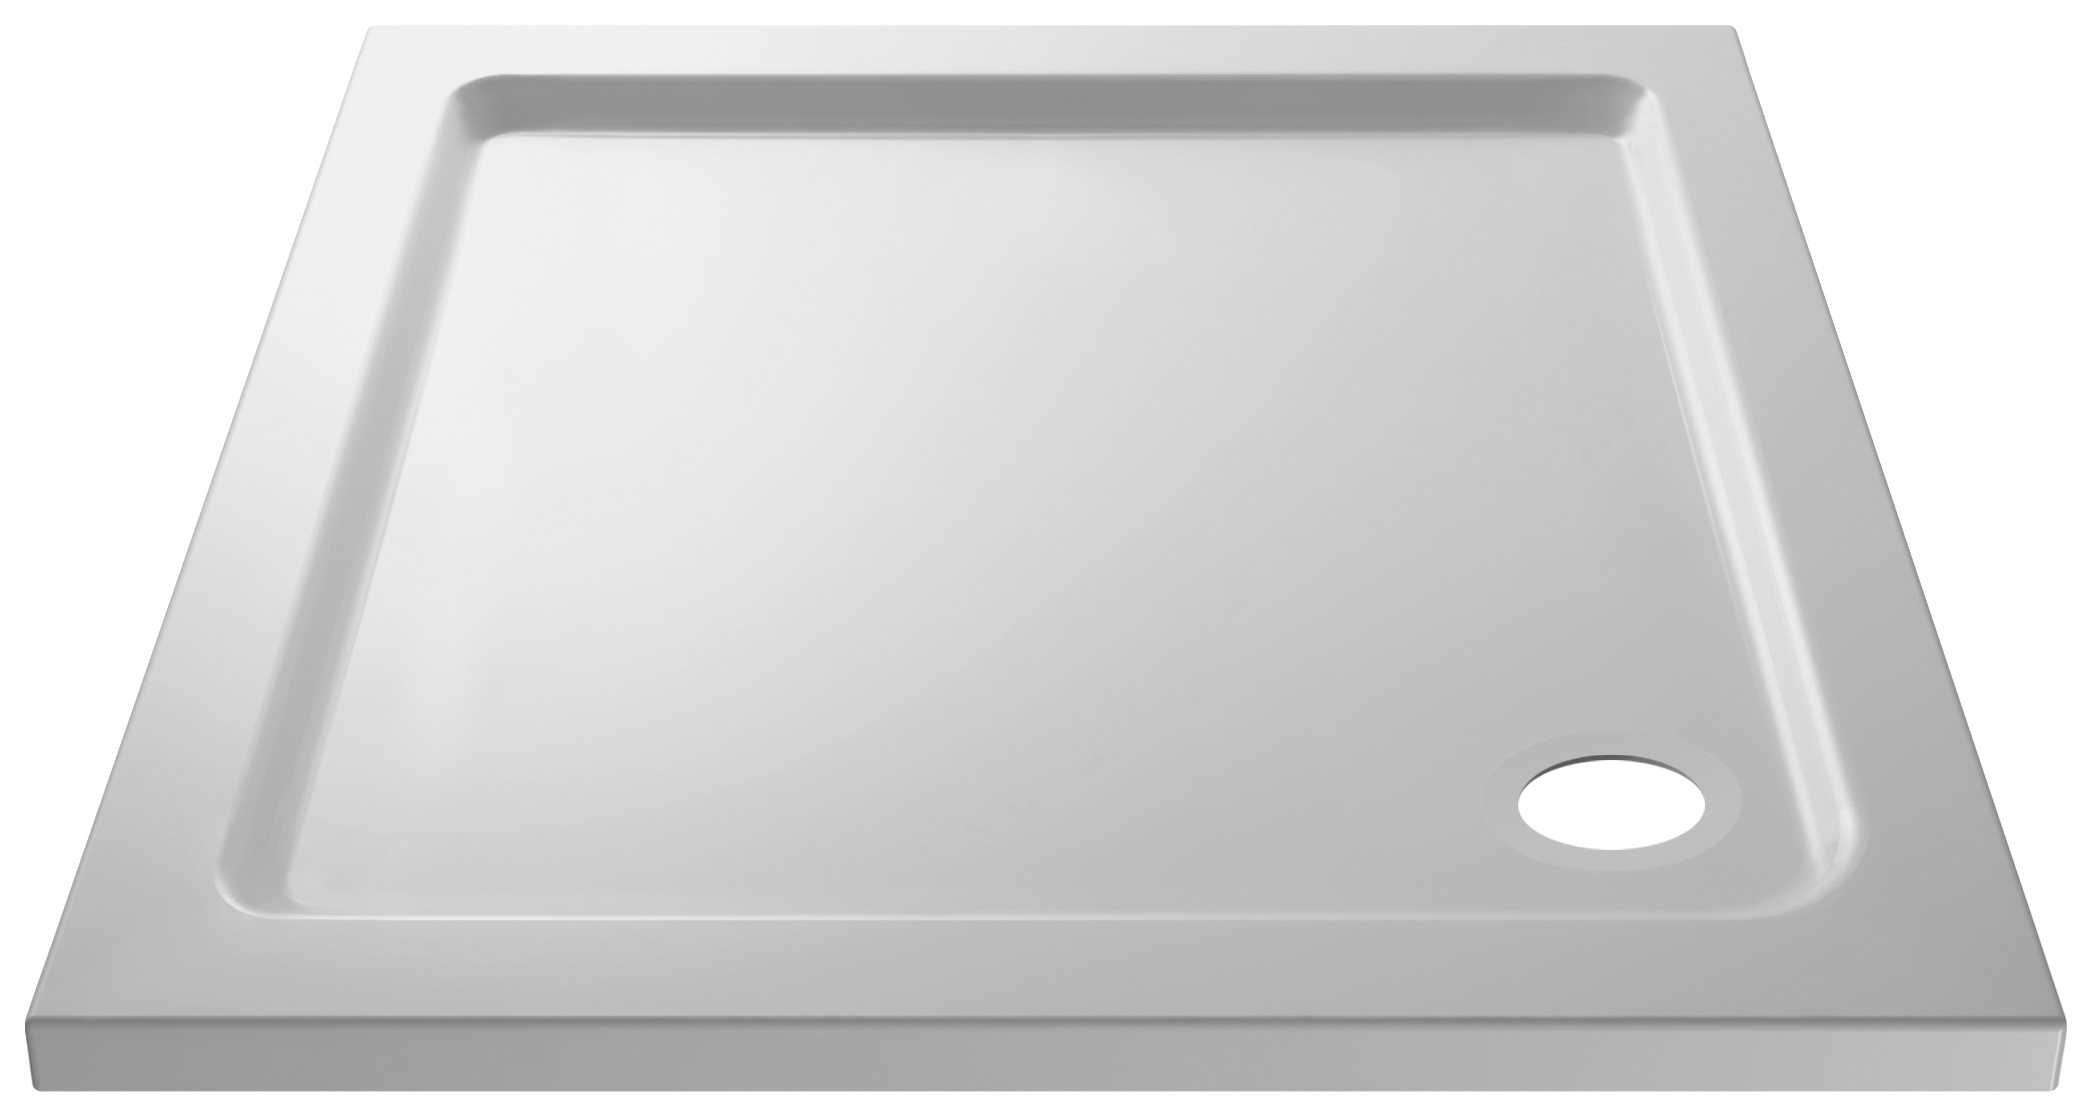 Wickes Square Pearlstone Shower Tray - 760 x 760mm